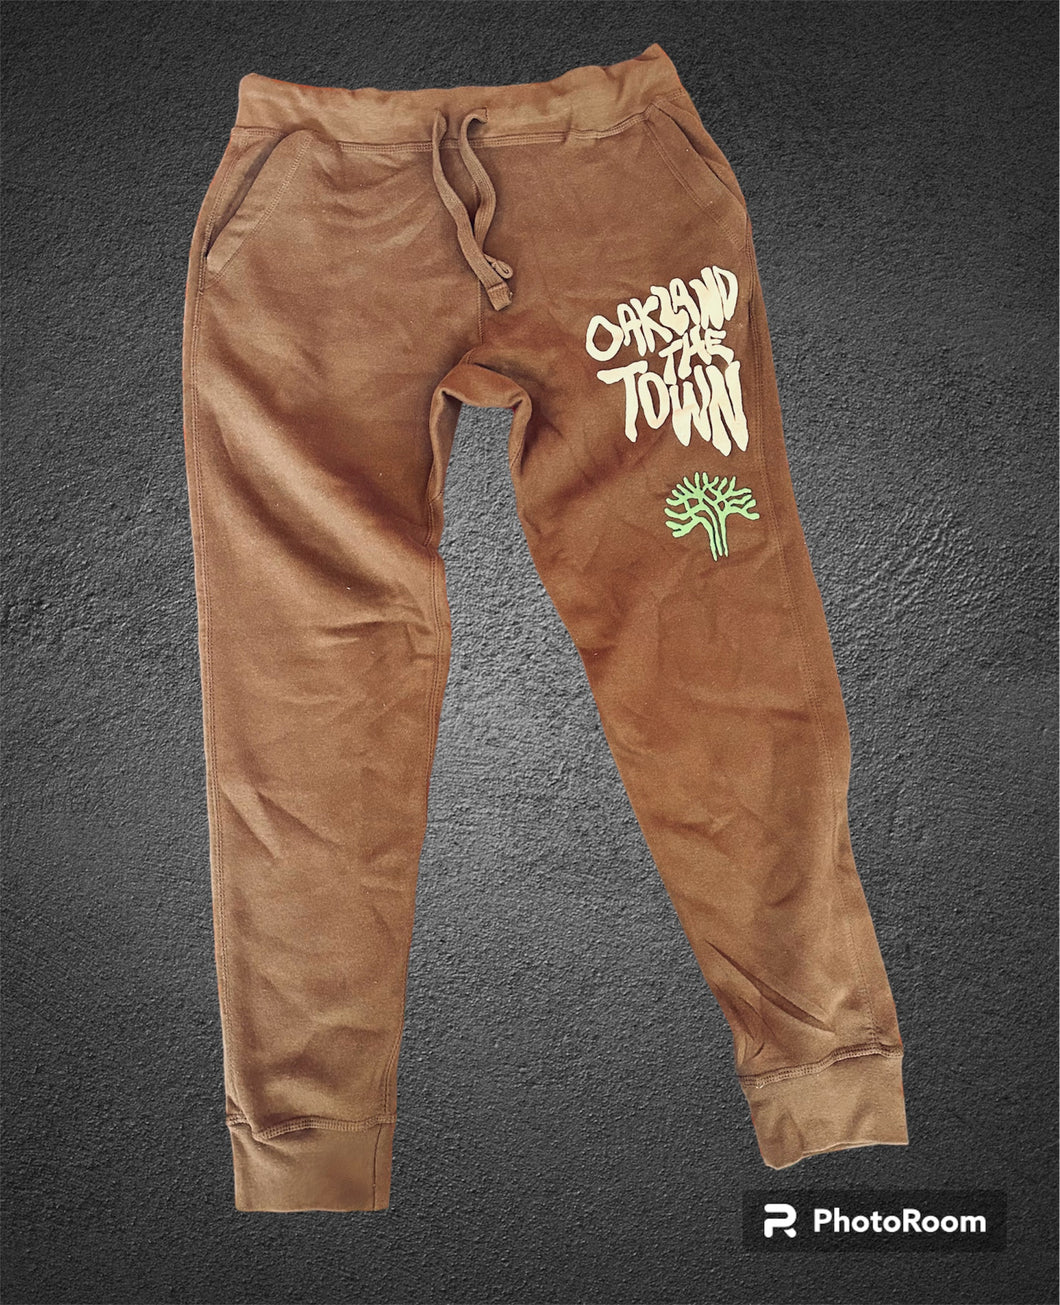 OAKLAND THE TOWN “JOGGERS